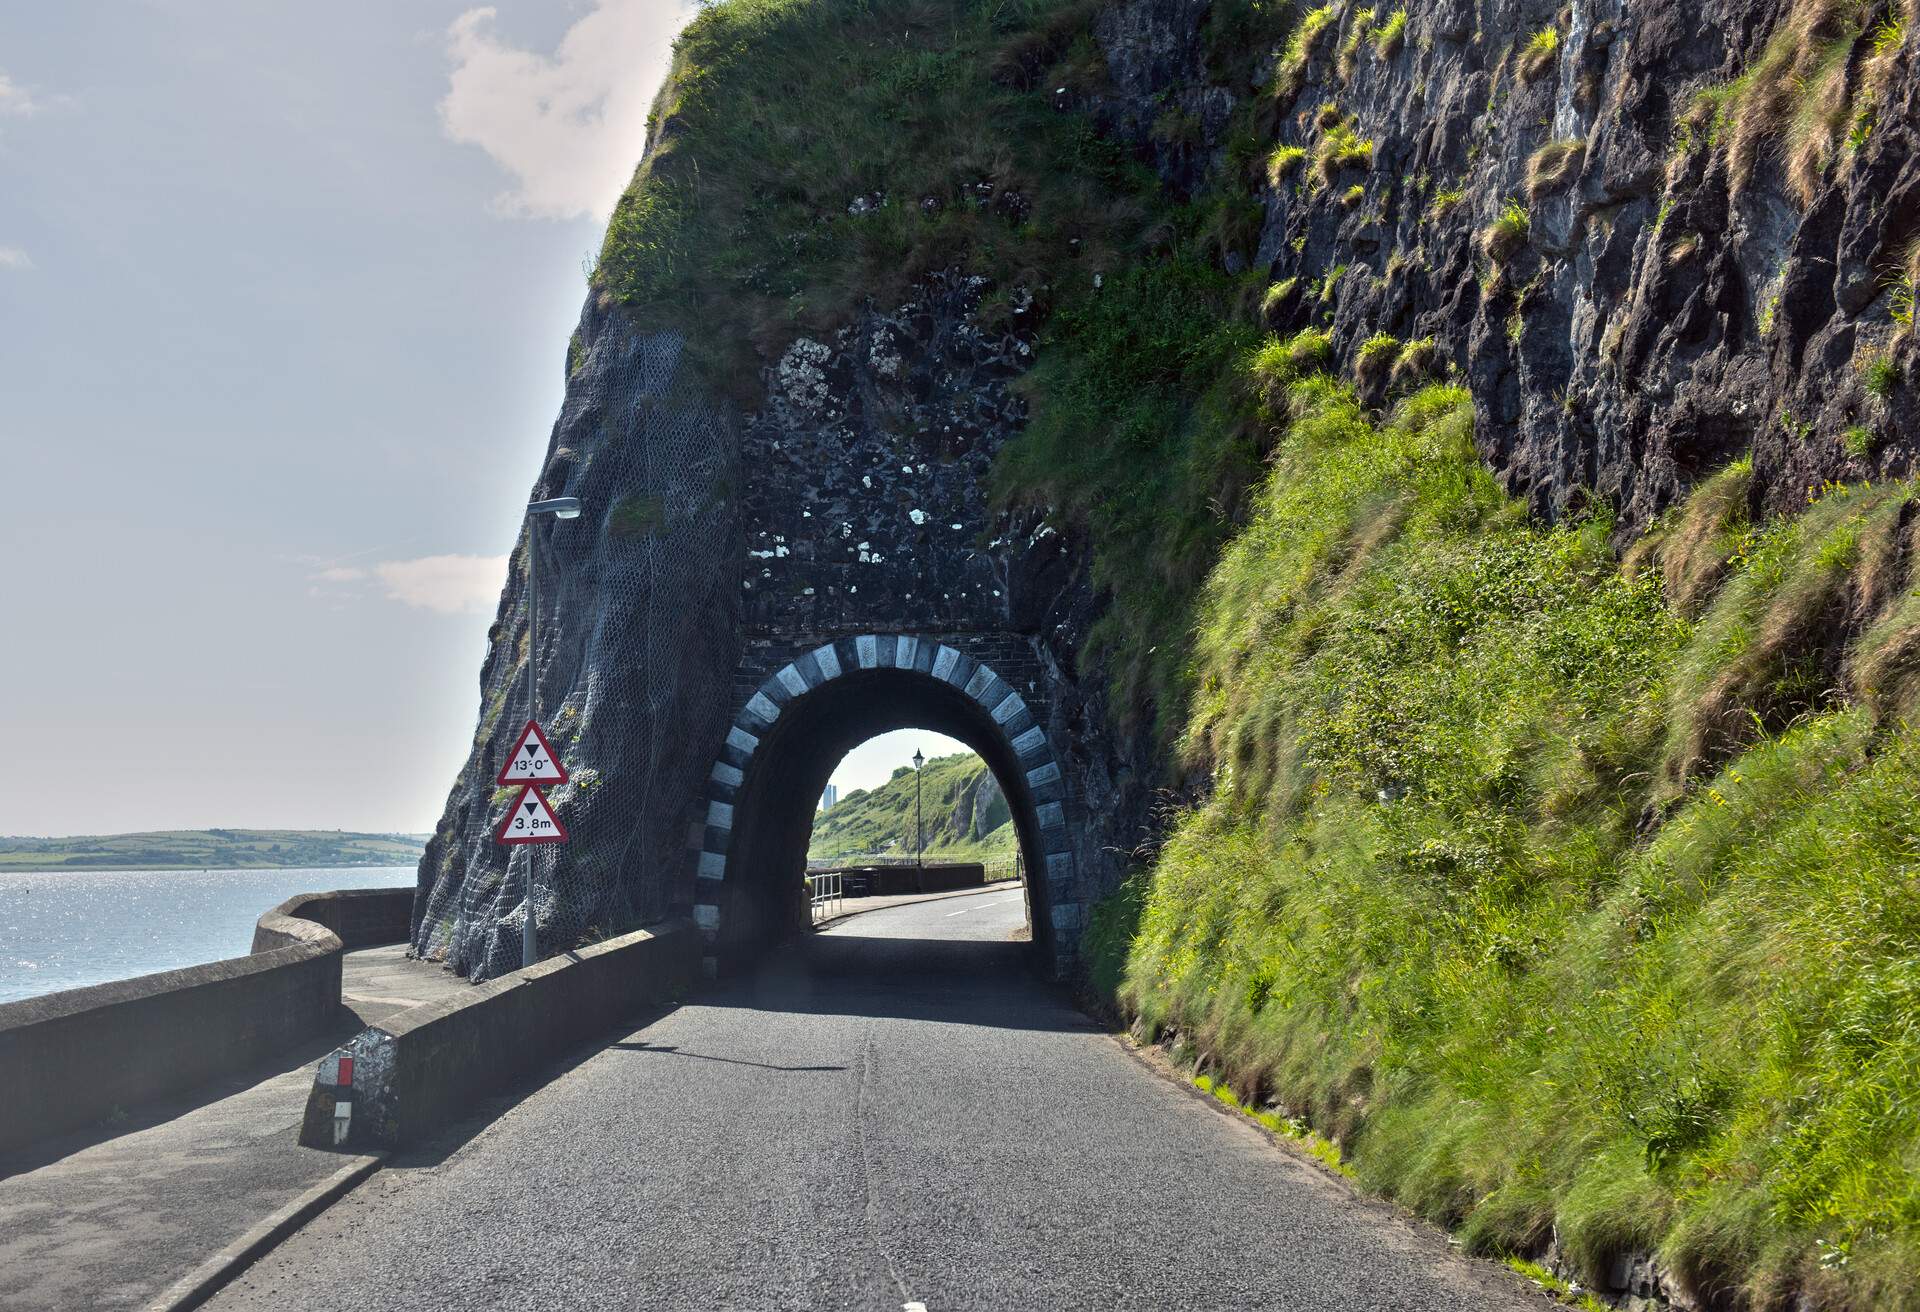 Coastal road and tunnel at Larne in County Antrim of Northern Ireland